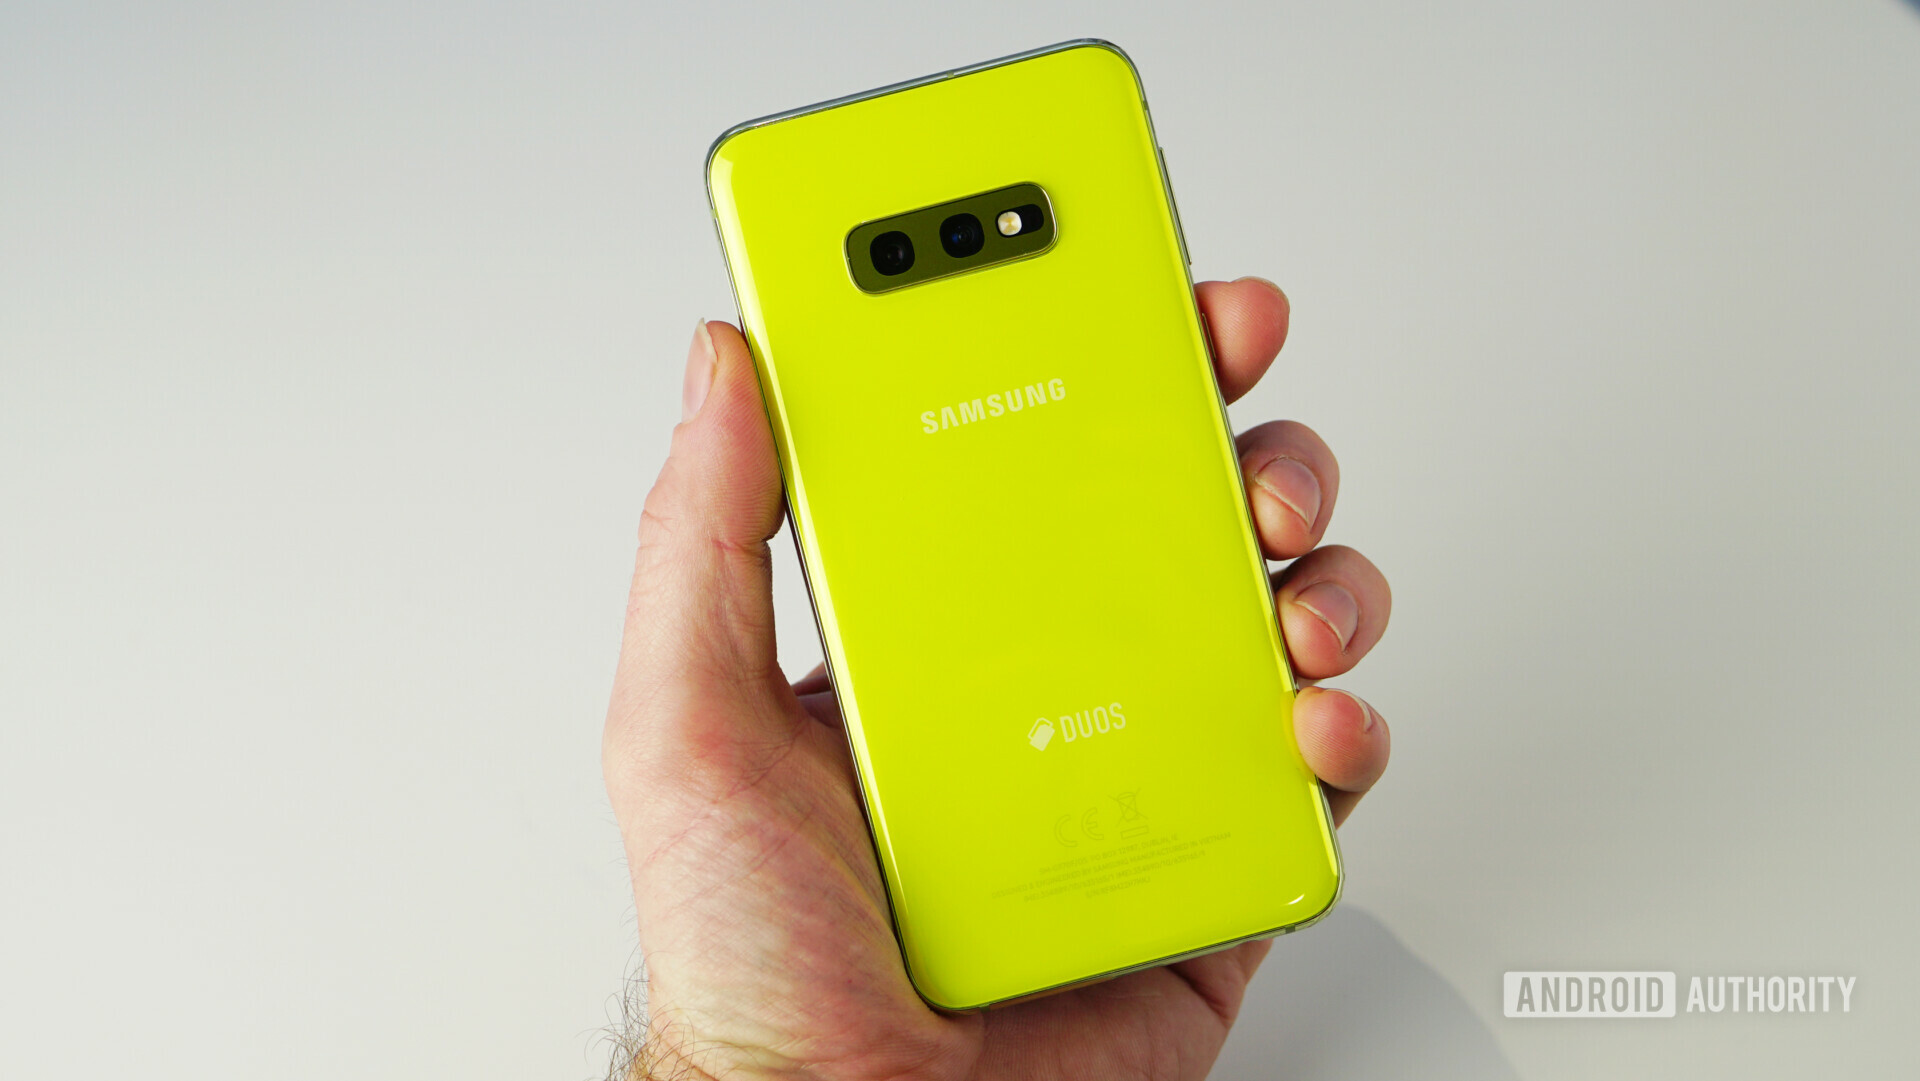 Back side of the Samsung Galaxy S10e in yellow color, held in hand.